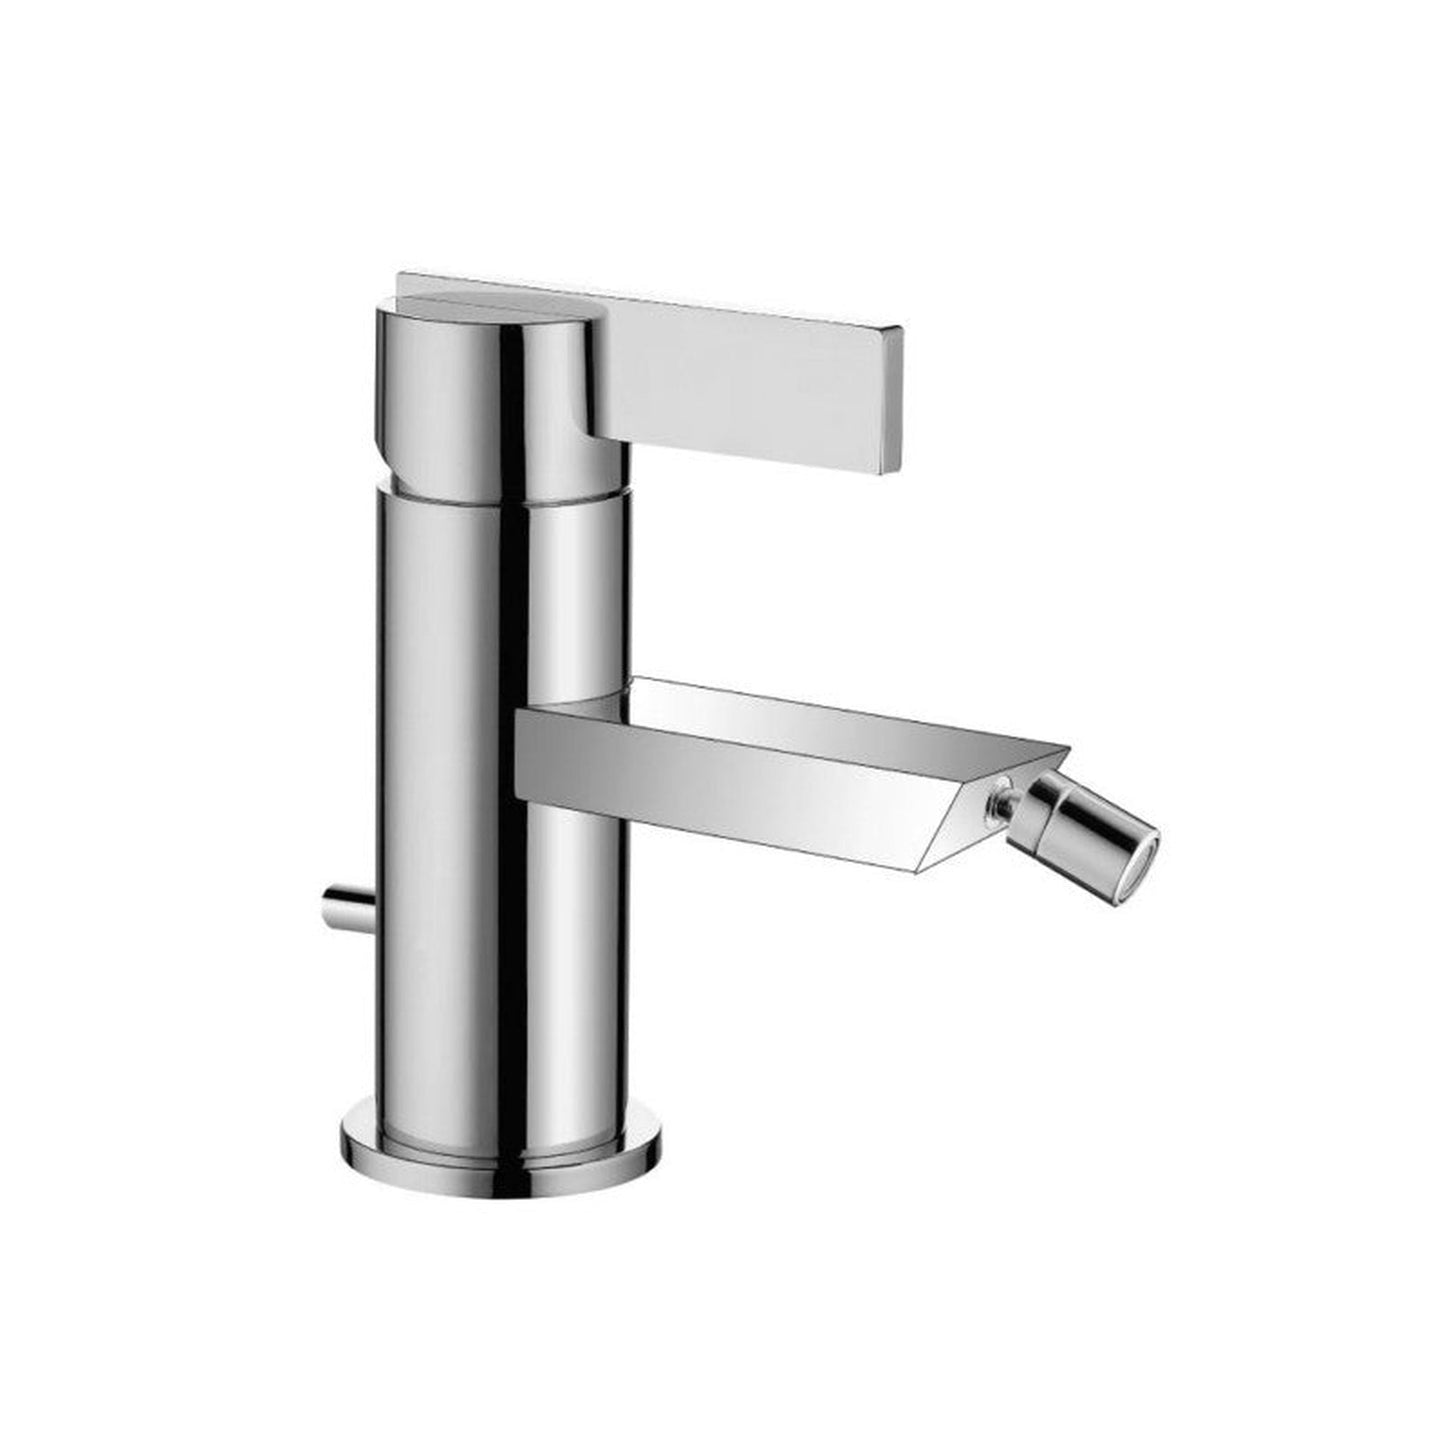 Isenberg Serie 145 6" Single-Hole Chrome Solid Brass Bidet Faucet With Drain